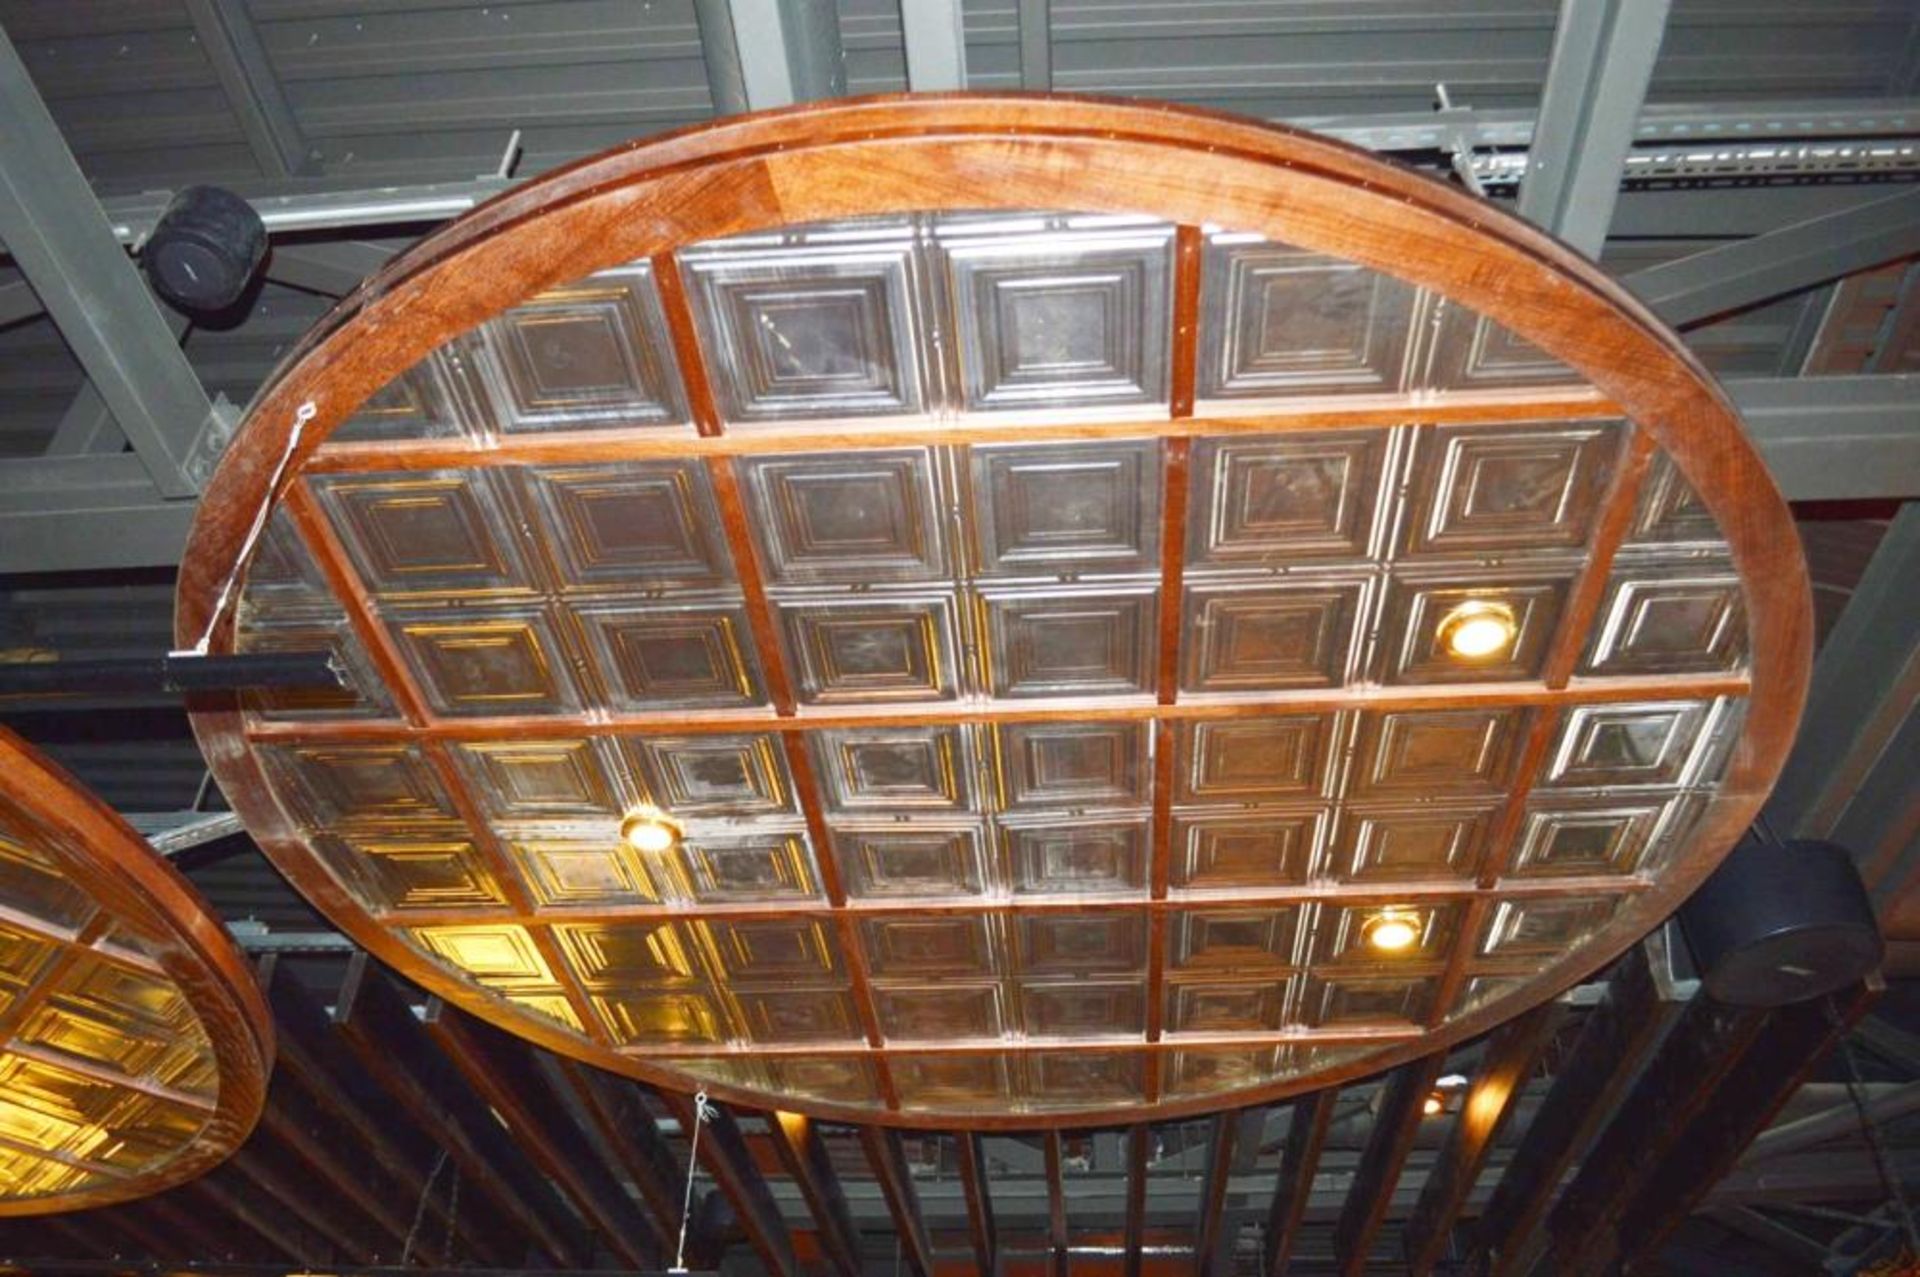 1 x Bespoke Suspended Round Ceiling Panel in Dark Wood With Glass Inserts - Approx 3 Meter - Image 2 of 6